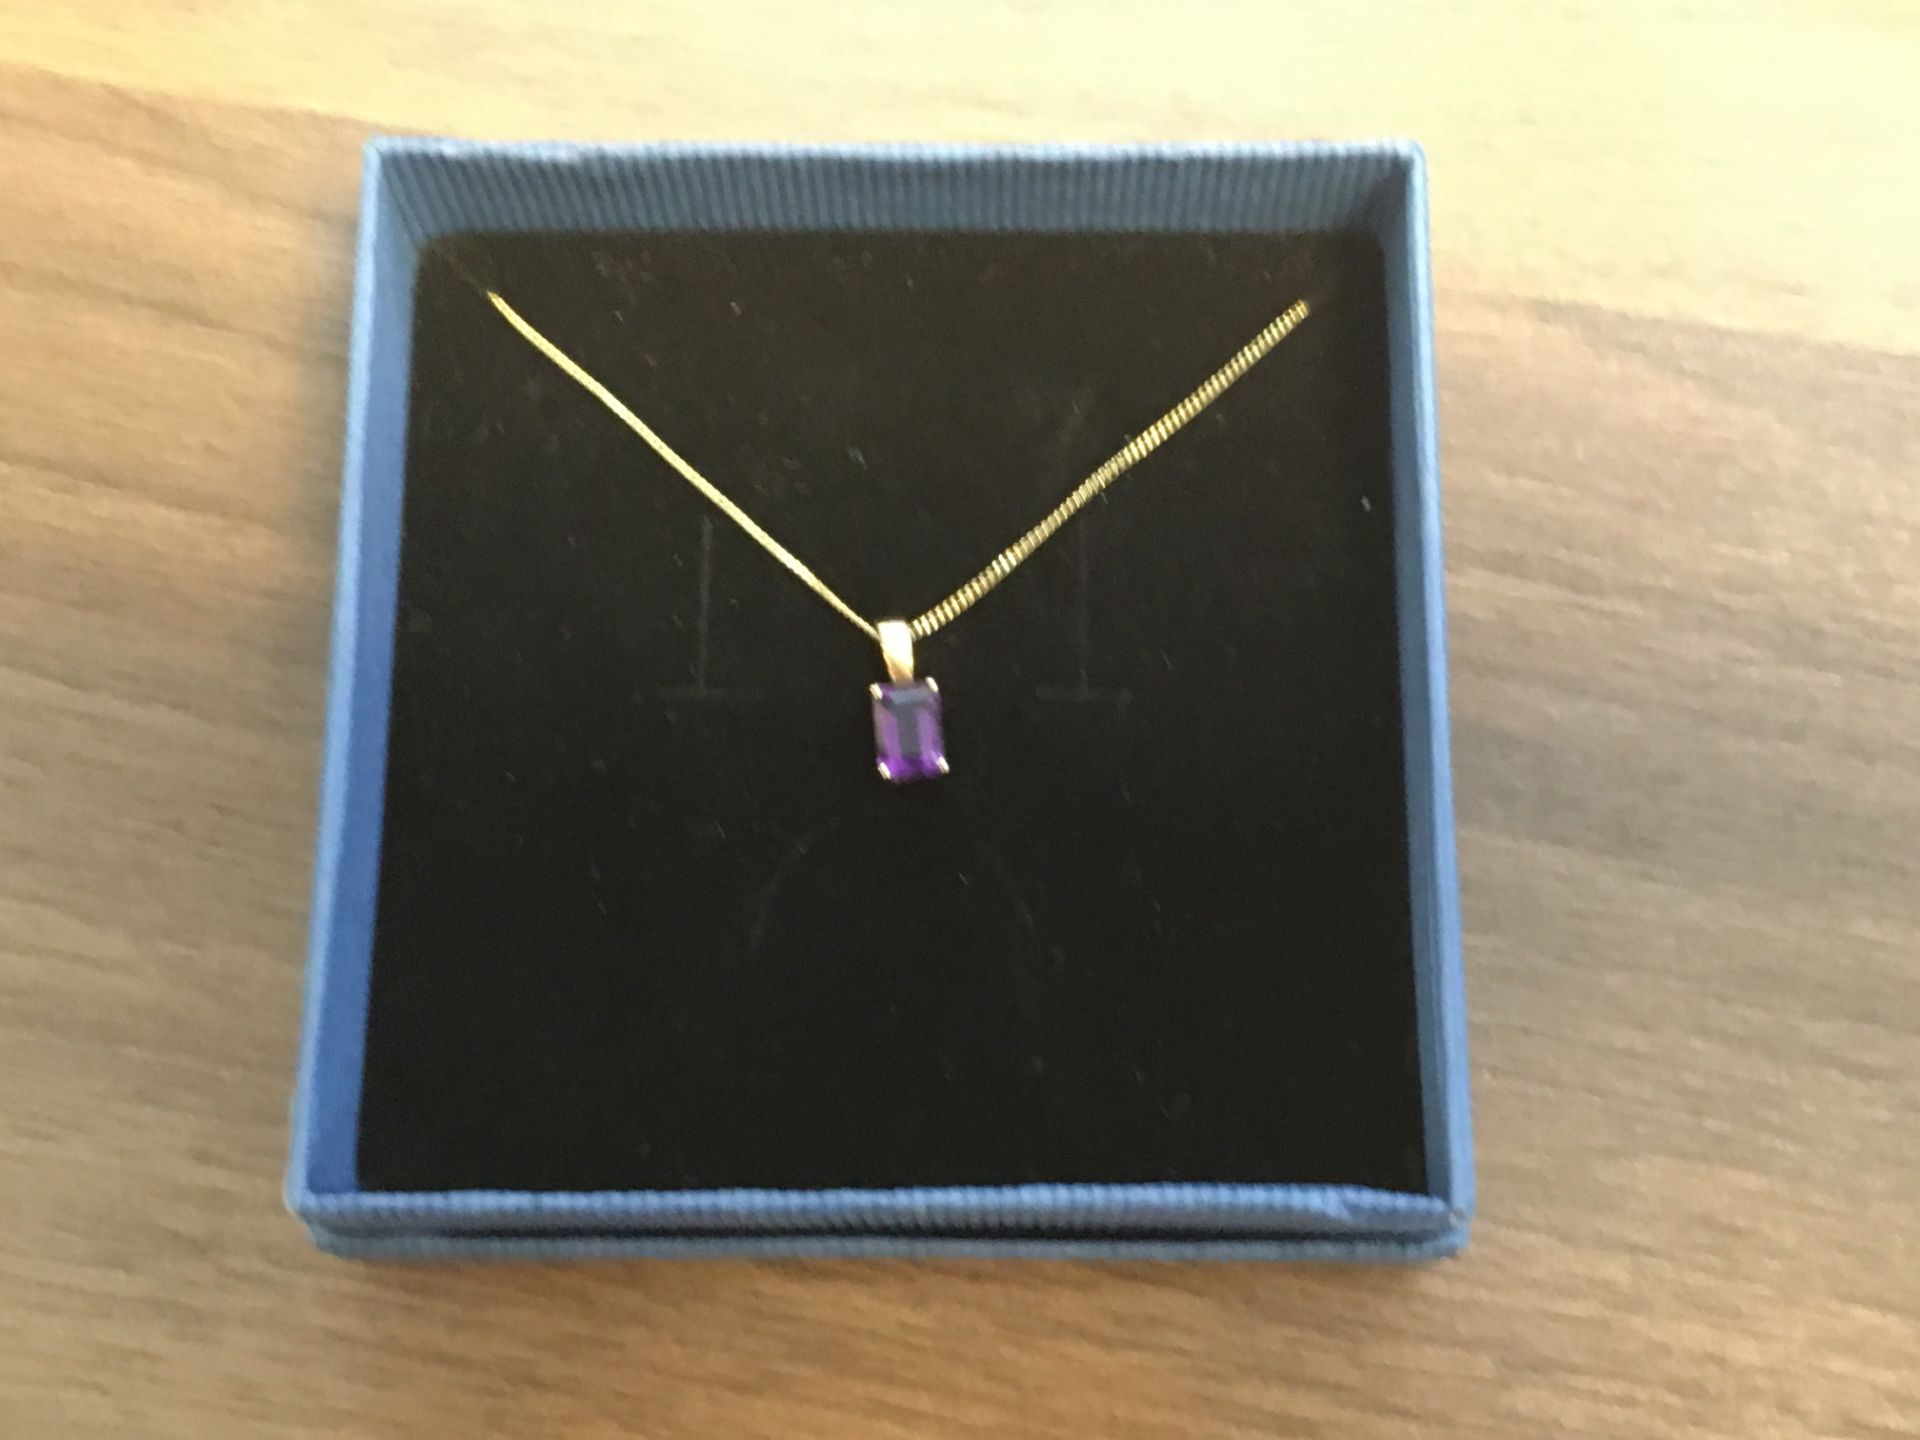 9k Yellow Gold Necklace with Amethyst Pendant - Image 2 of 2